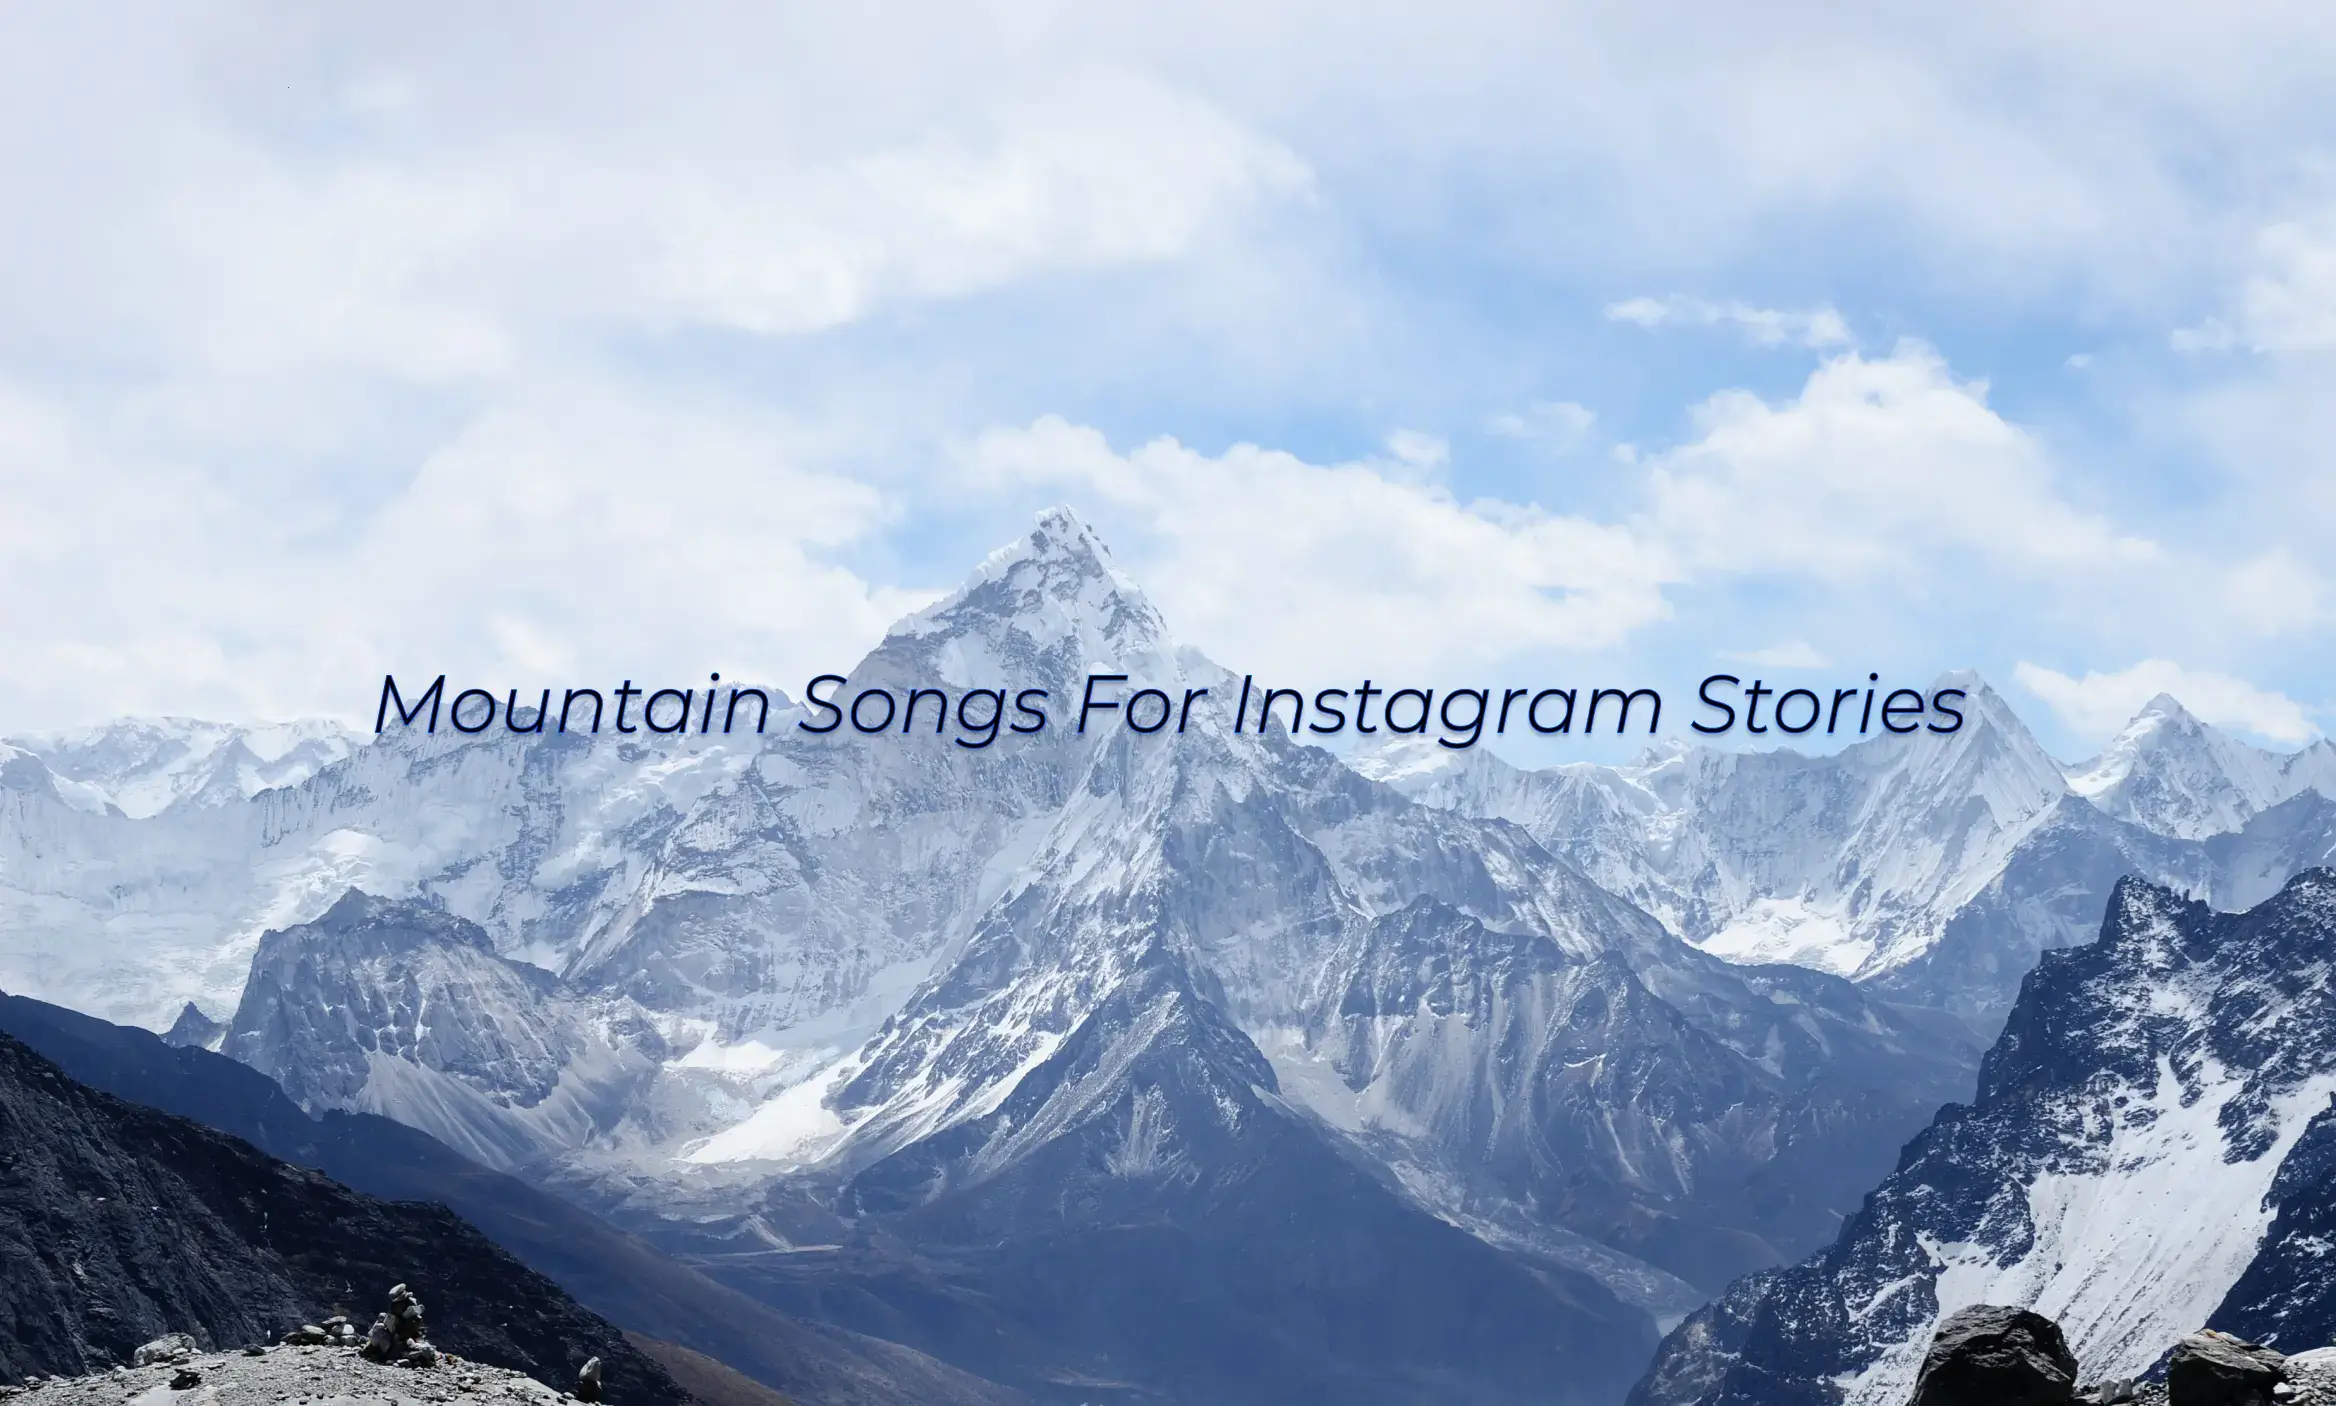 Mountain Songs For Instagram Stories